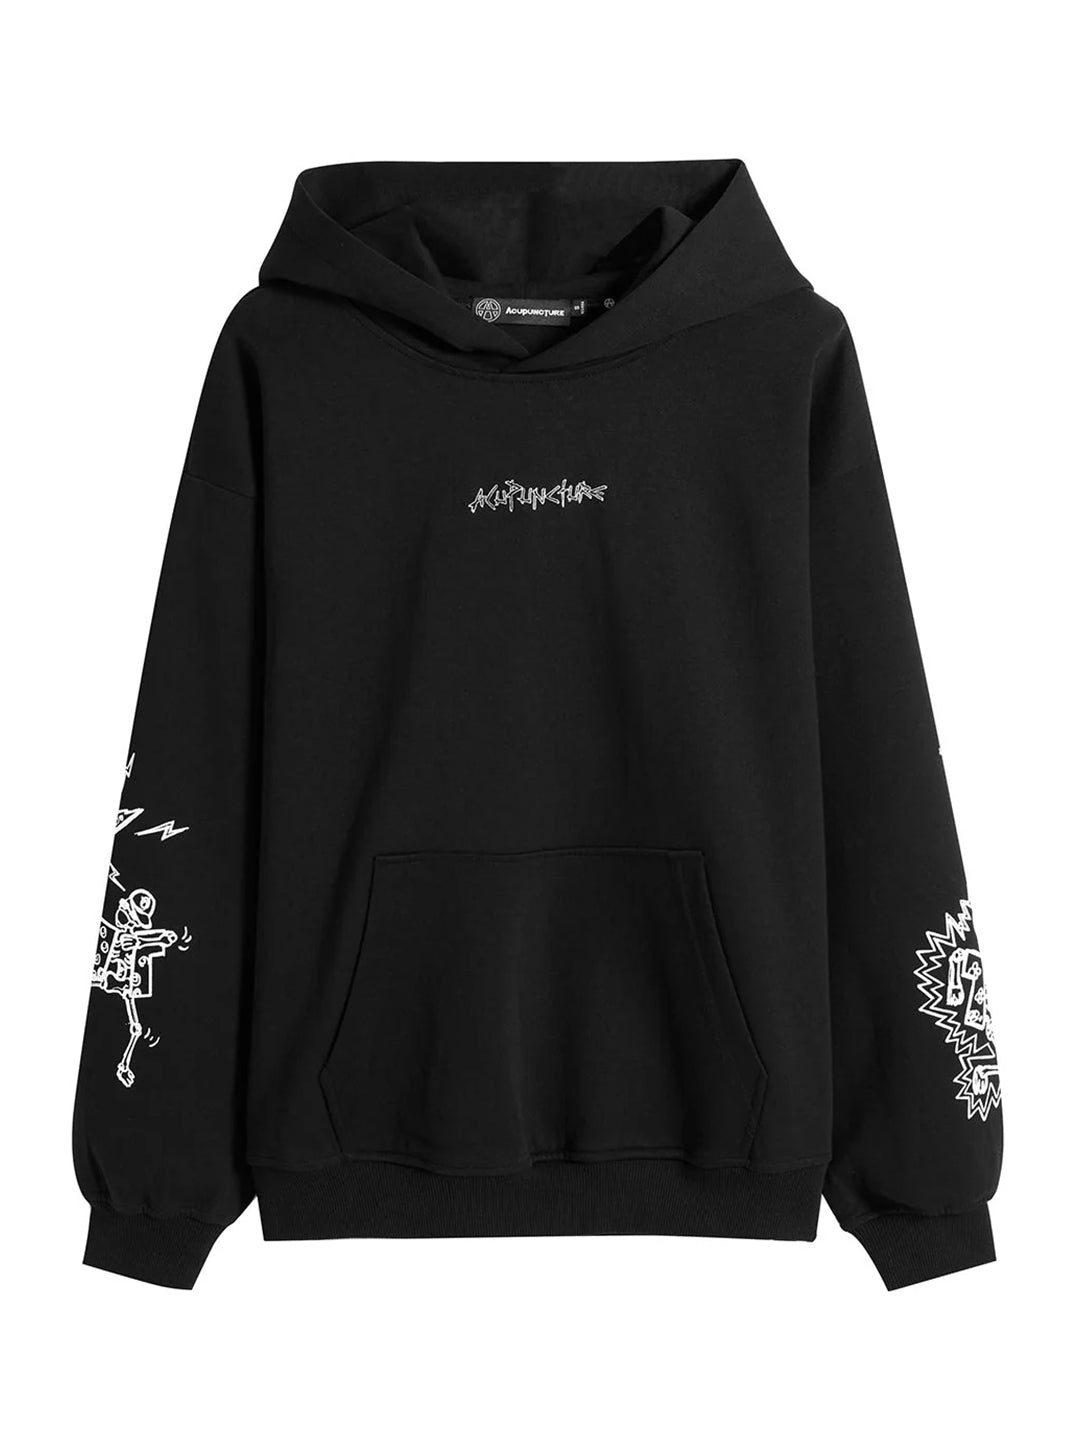 Acupuncture black sweatshirt with hood and print